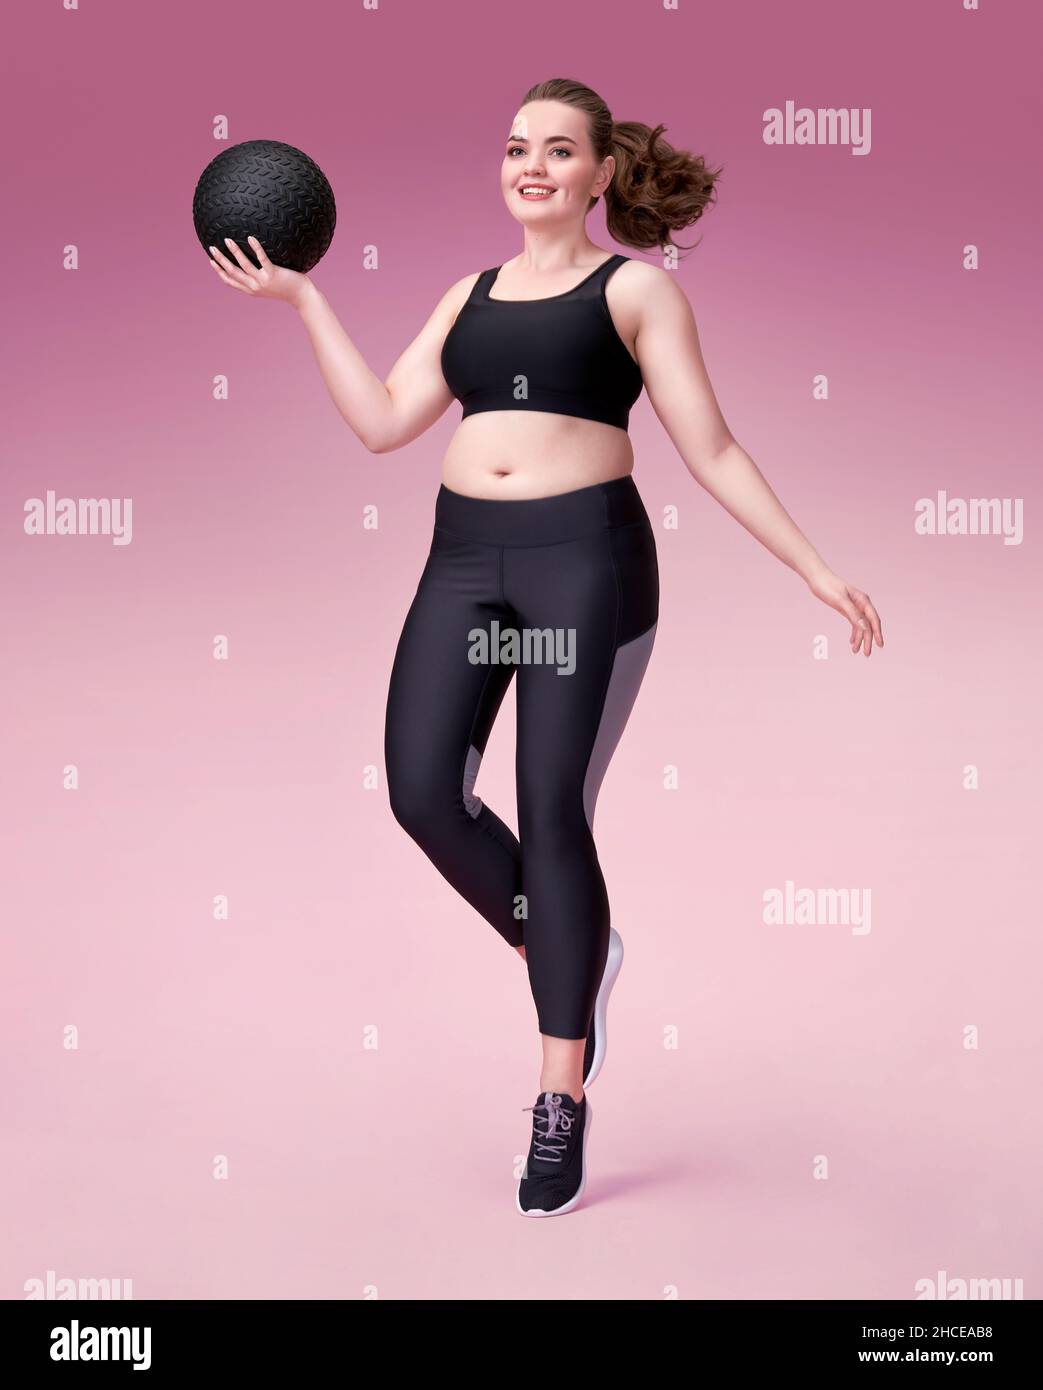 Sporty girl with medicine ball in motion. Photo of model with curvy figure in fashionable sportswear on pink background. Dynamic movement. Sports moti Stock Photo